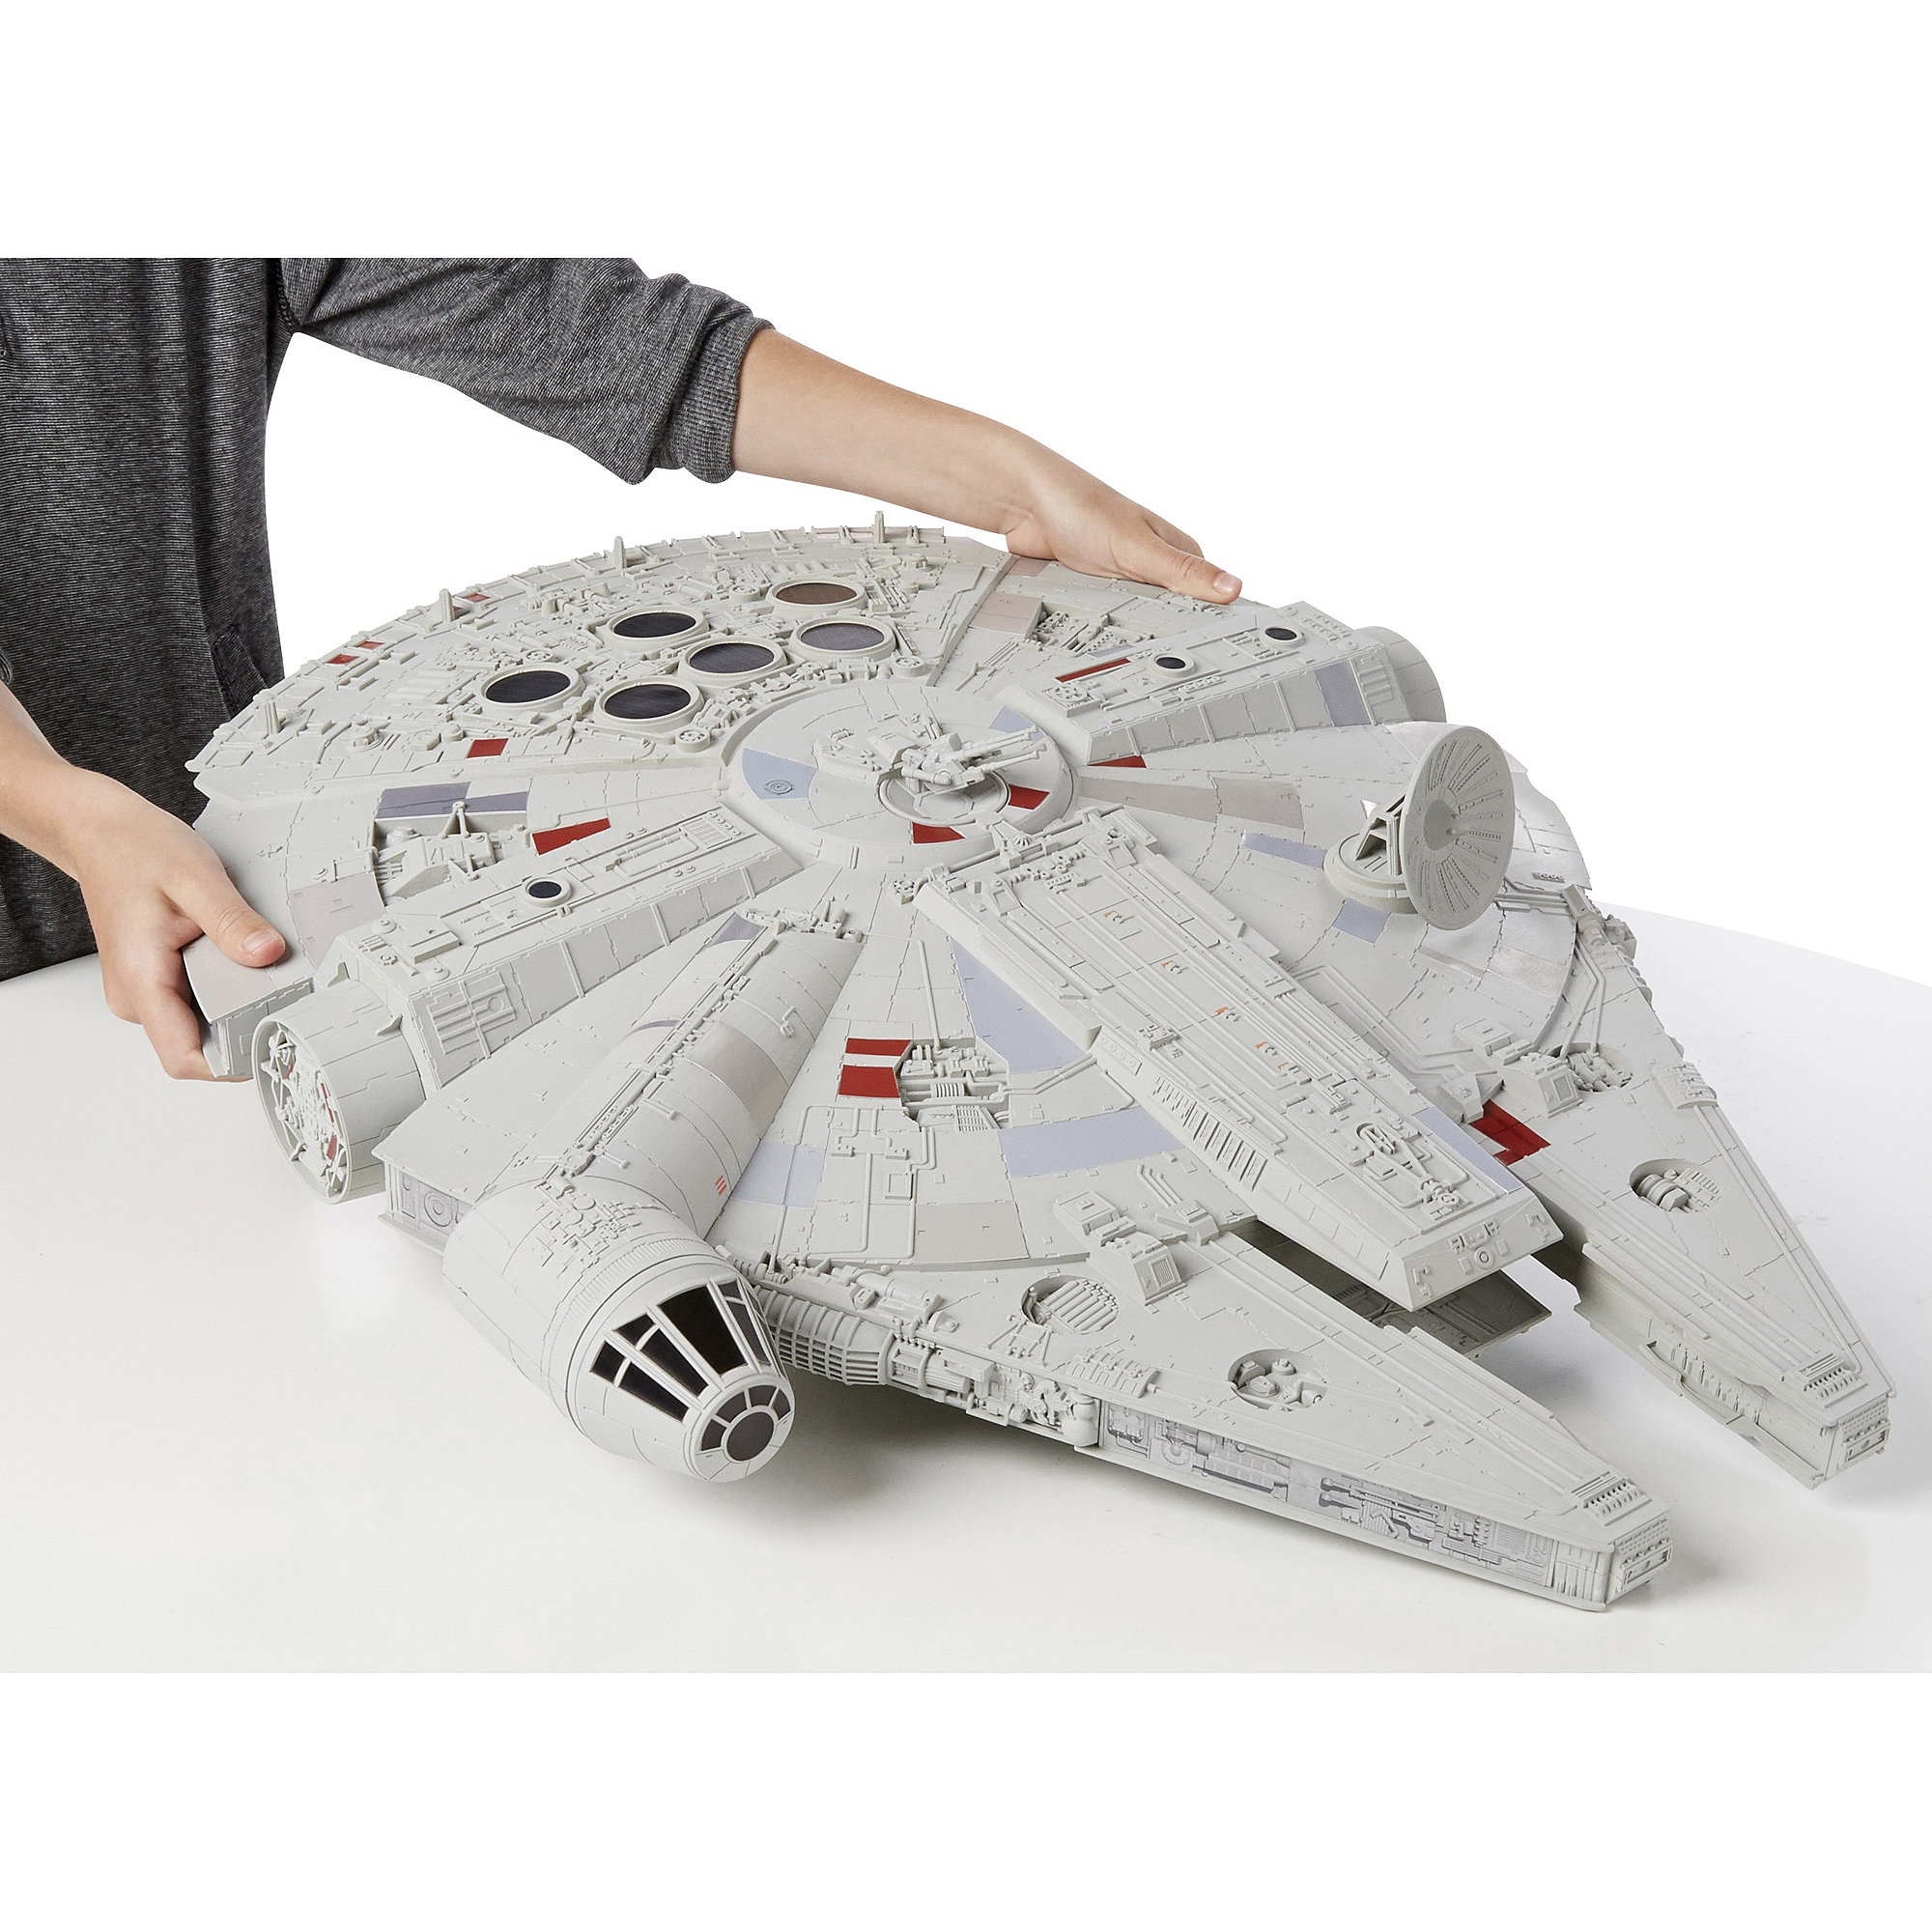 Disney s Star Wars Rebels Millennium Falcon Vehicle by Hasbro - image 3 of 7